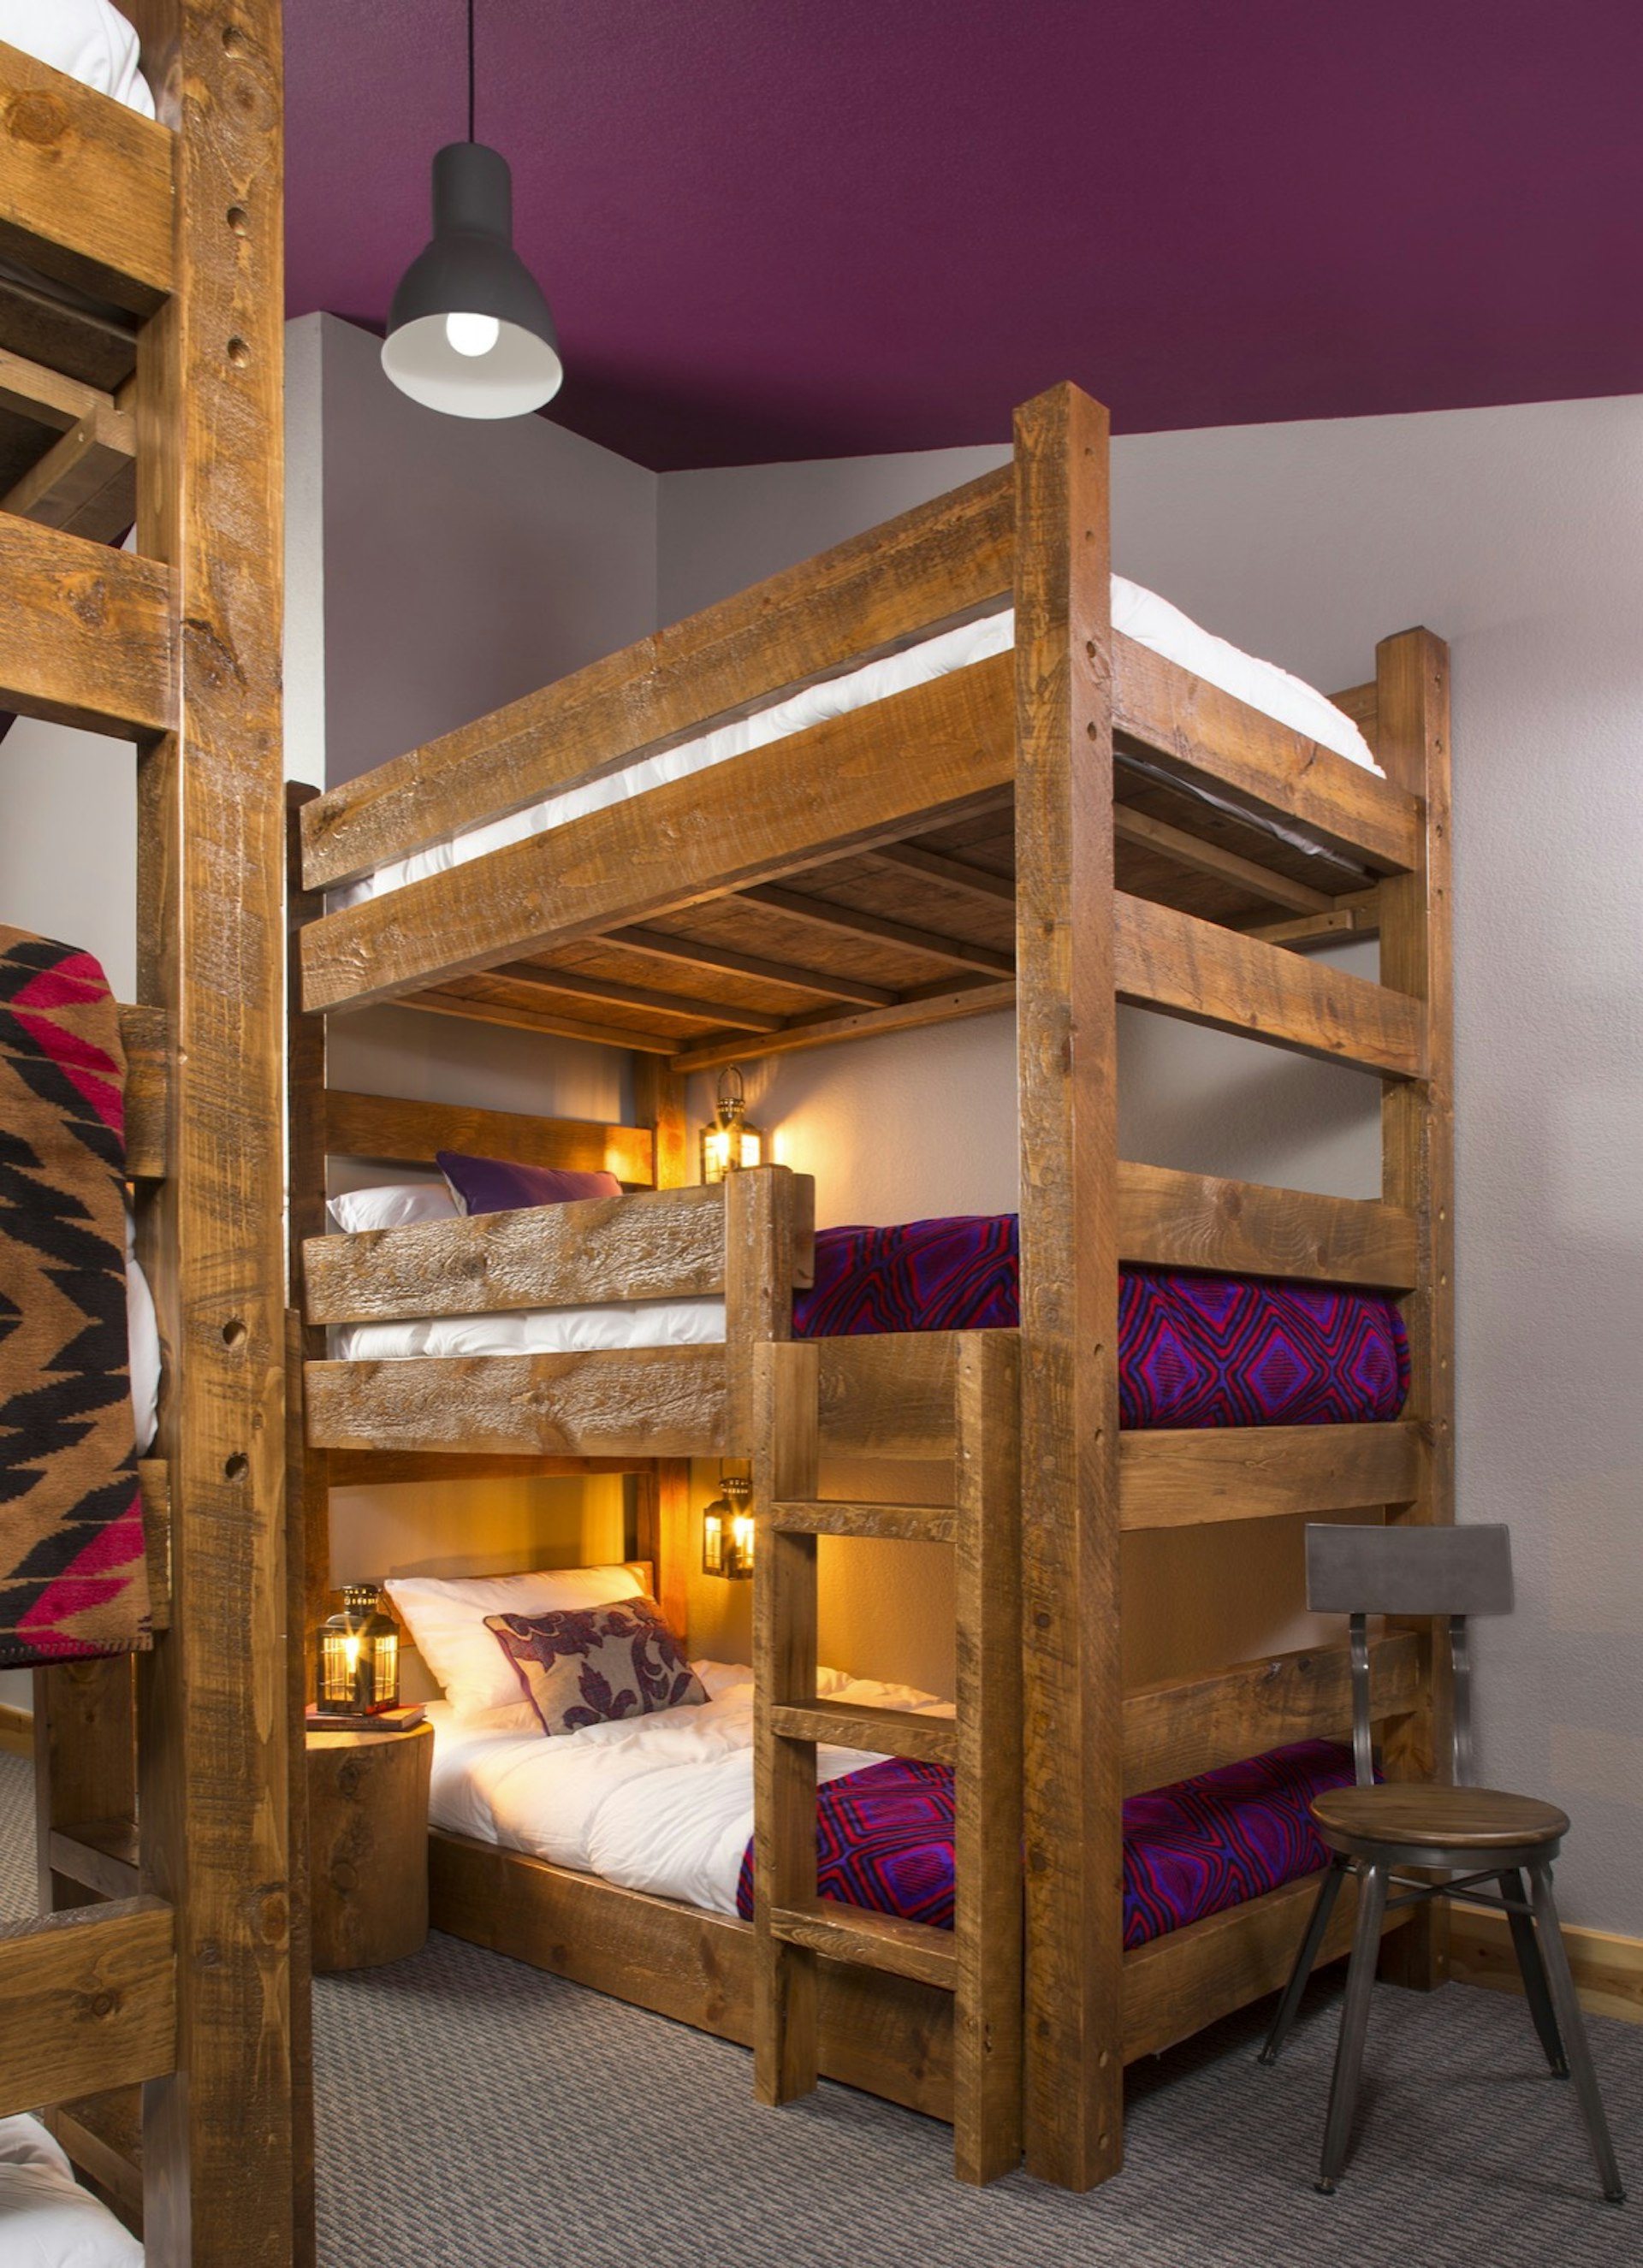 A triple-decker dorm bed, with purple mattresses and a purple ceiling